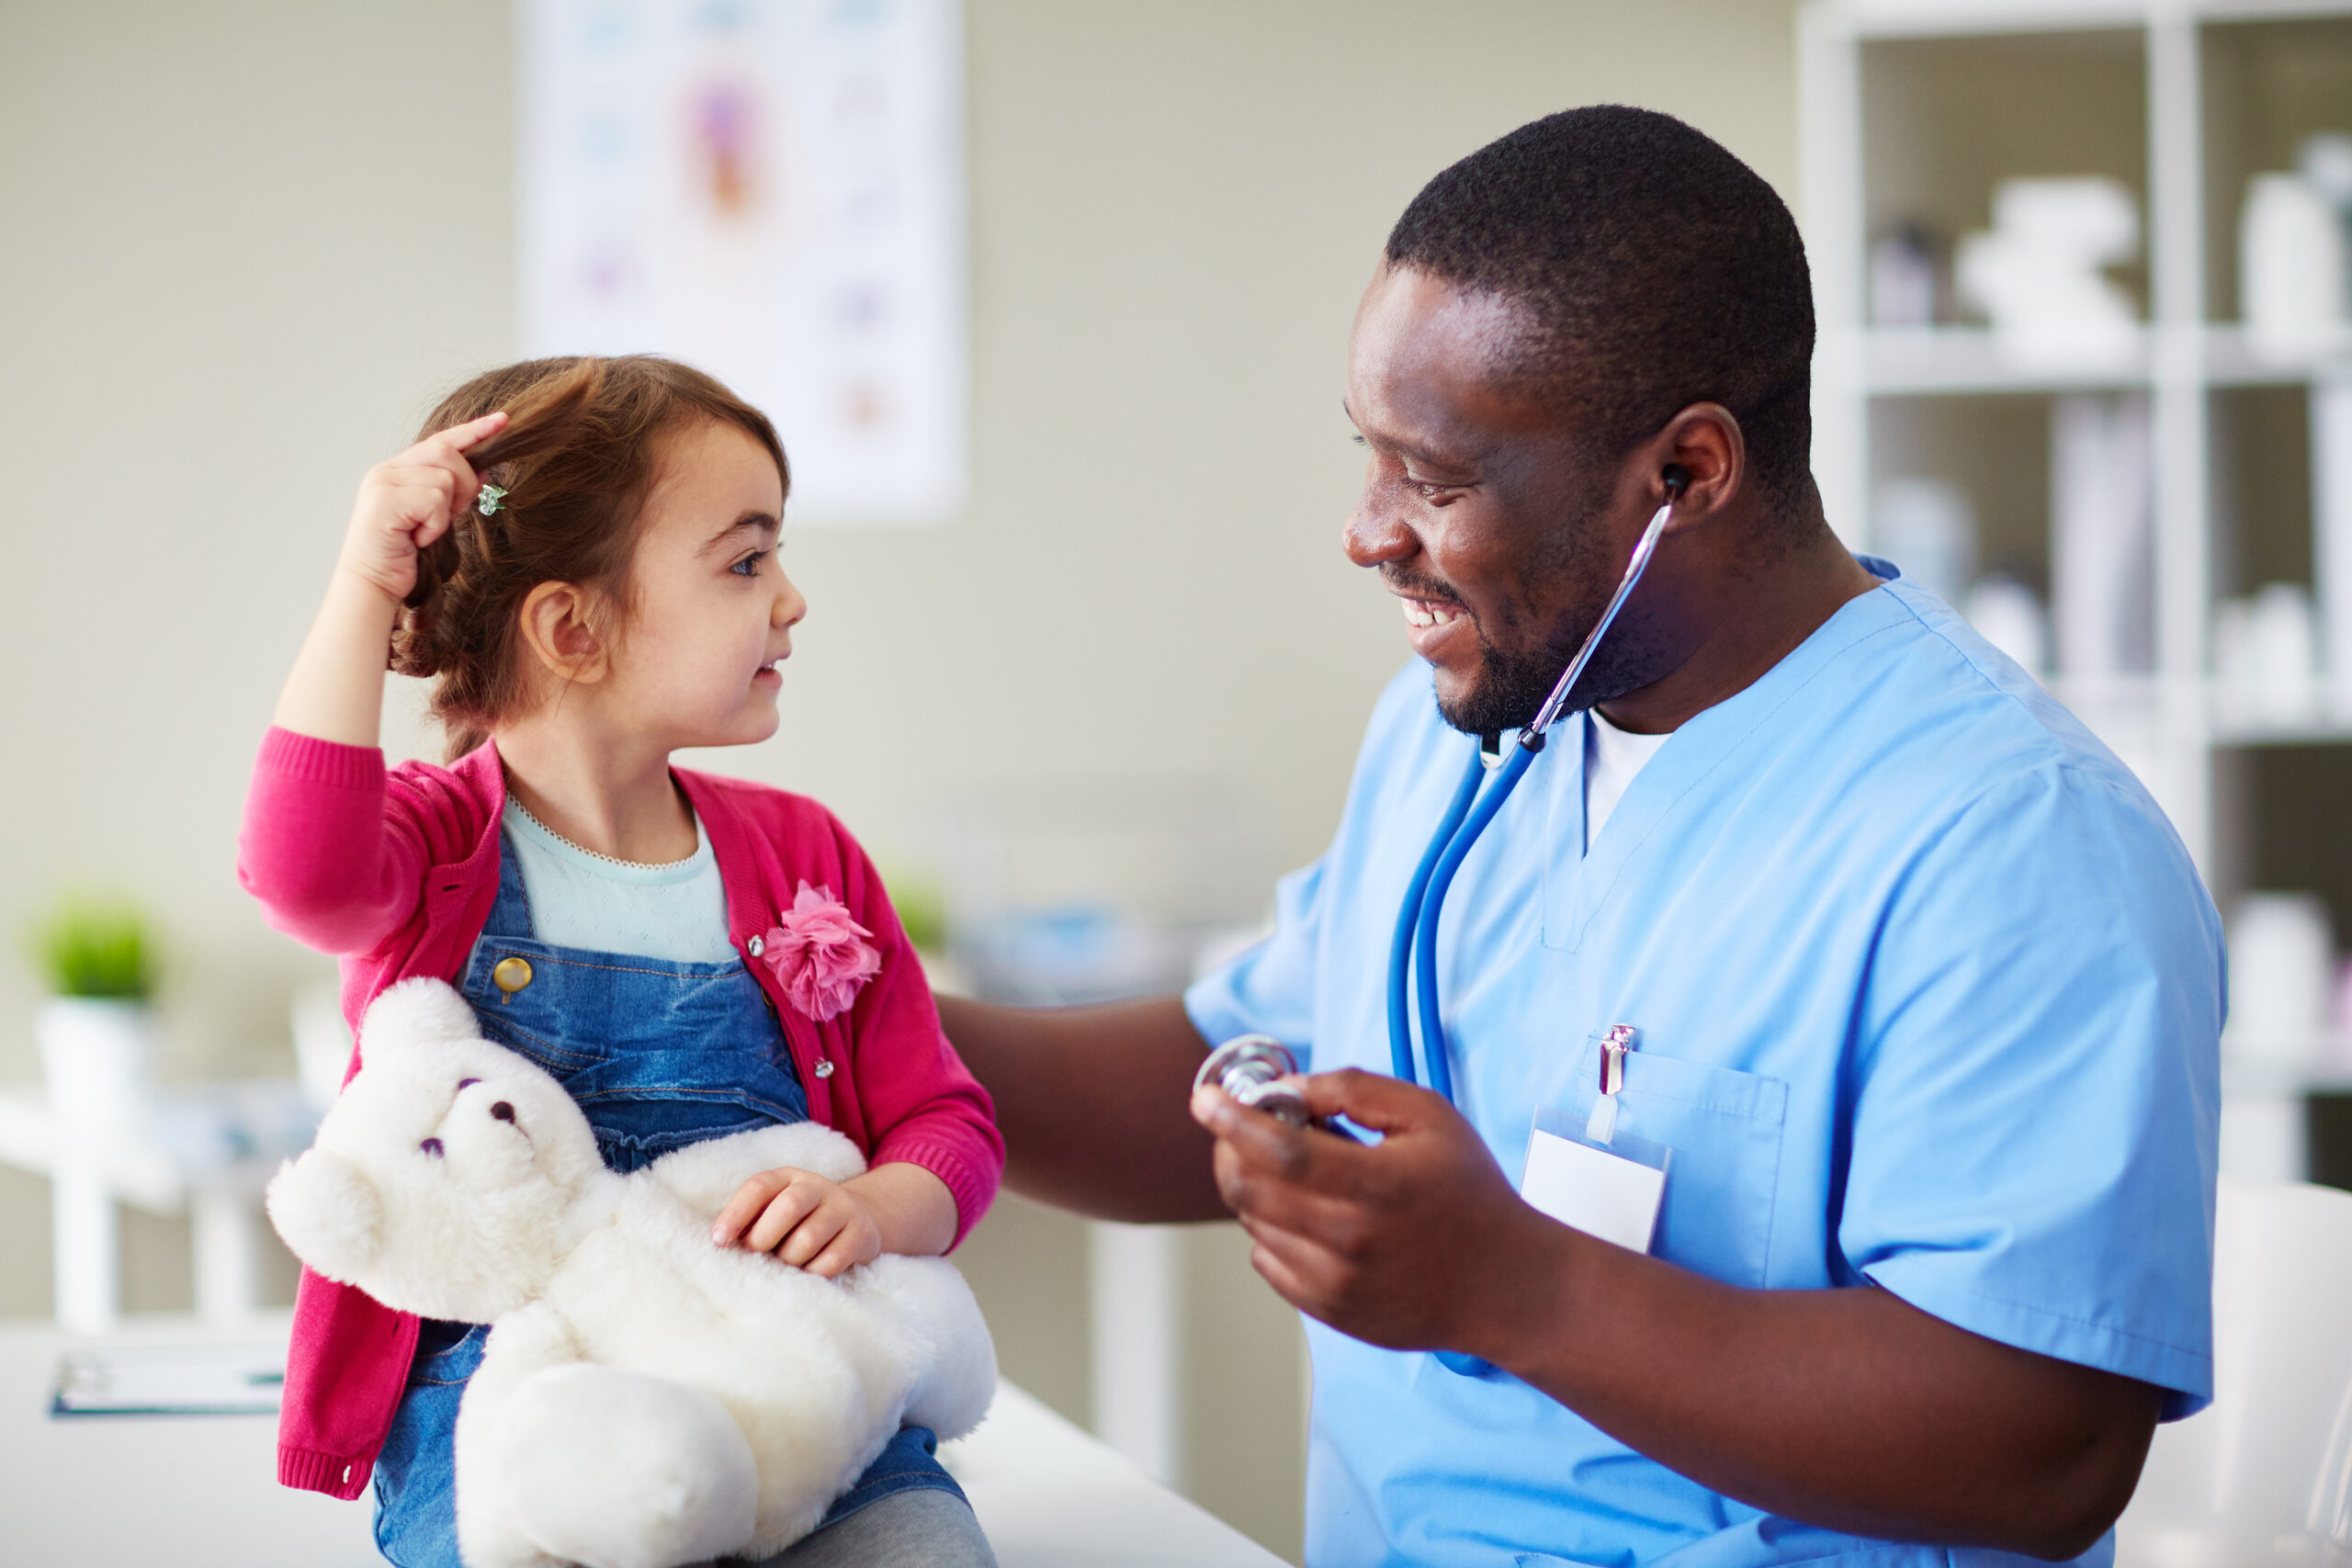 Young girl with teddy bear is talking to her doctor